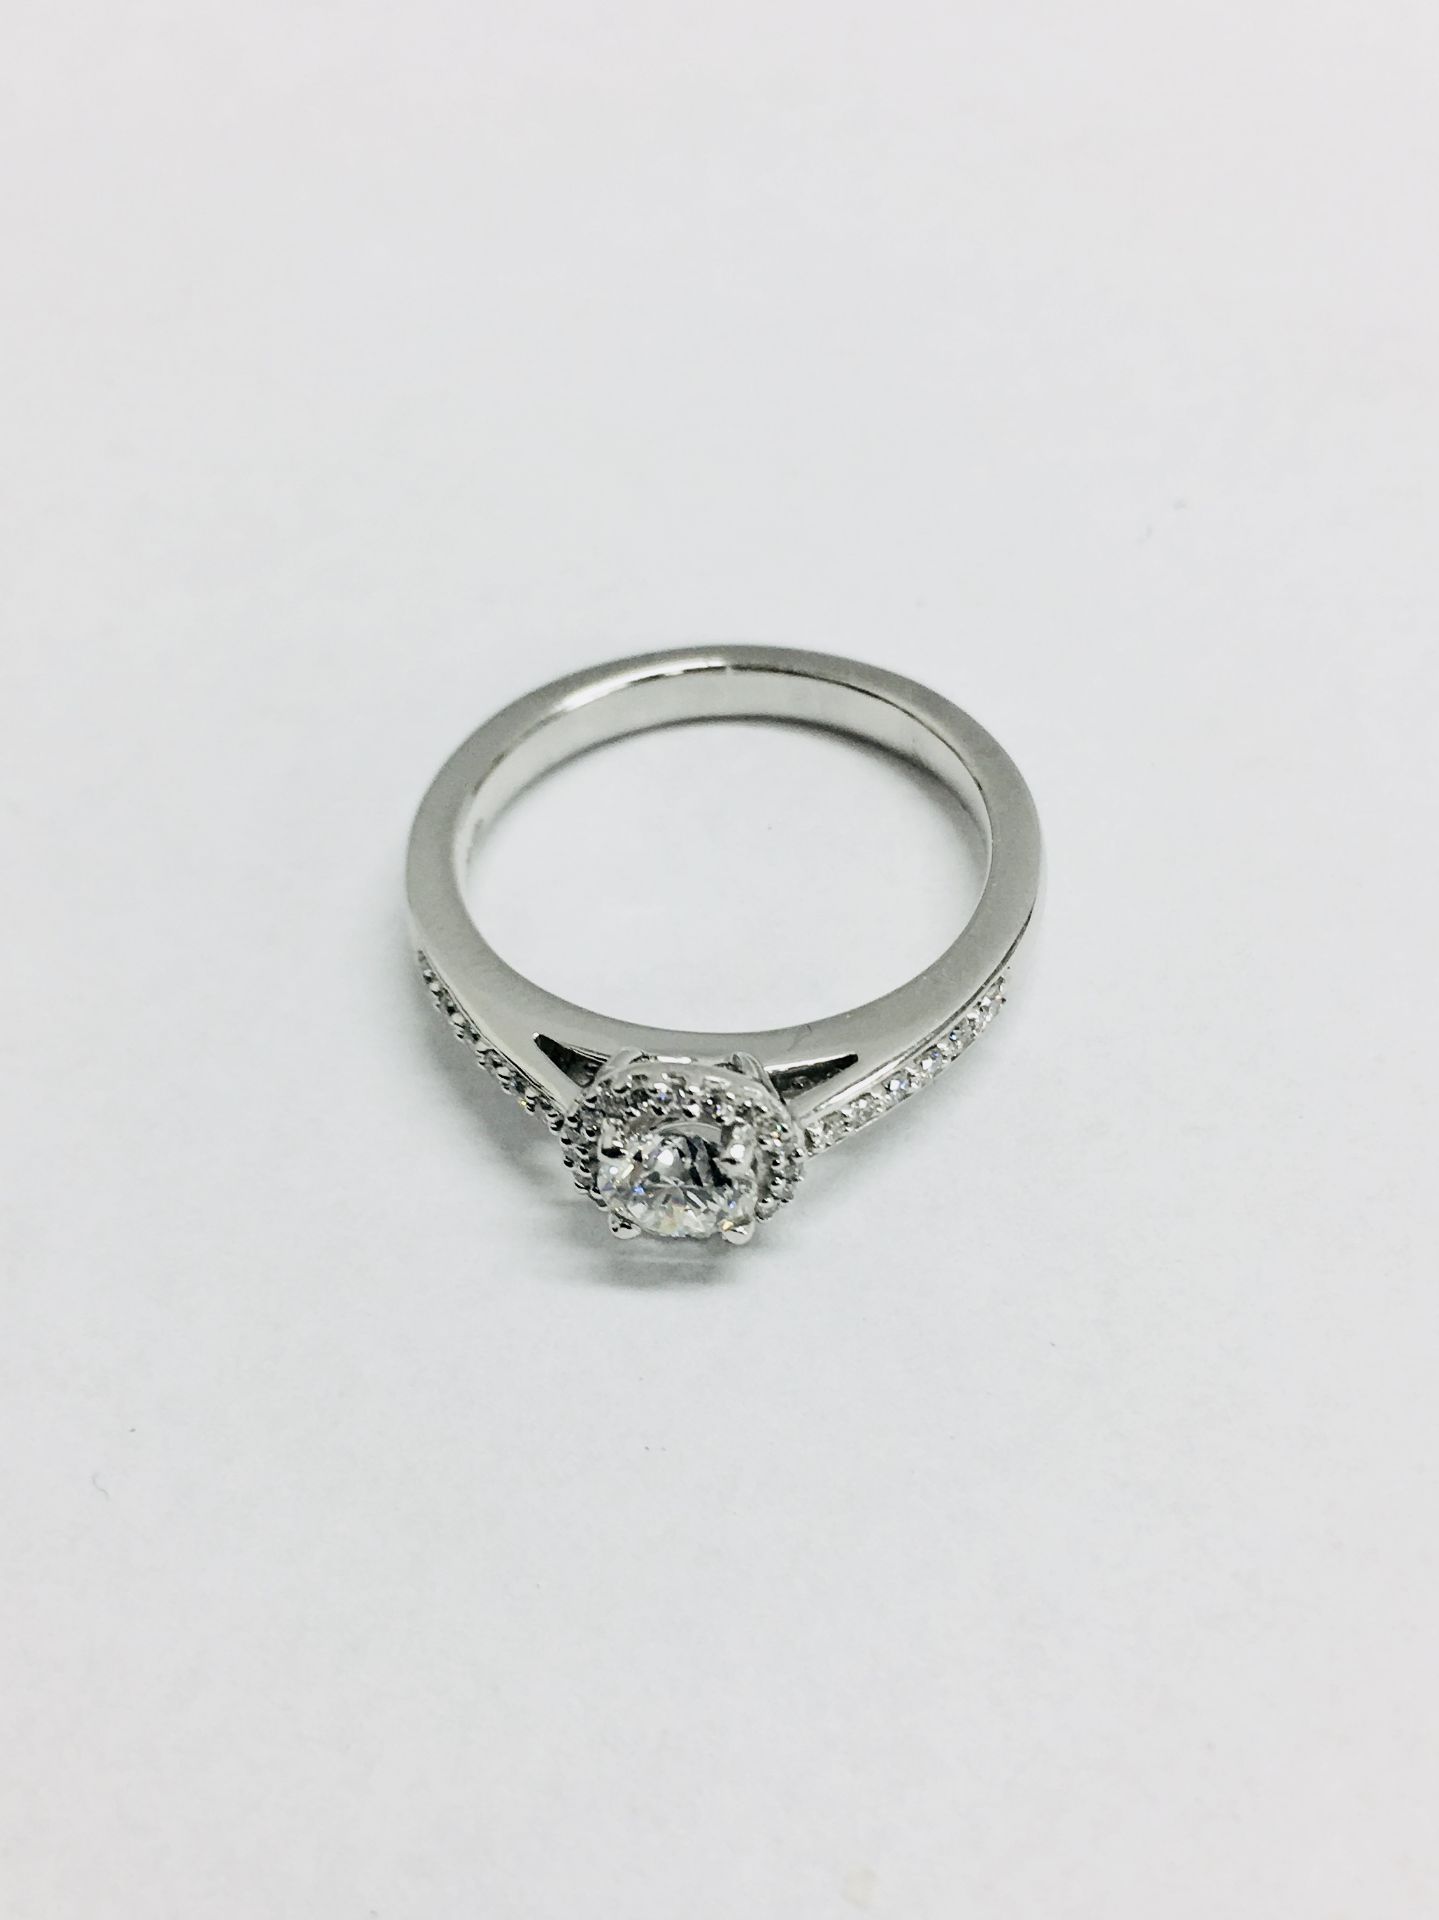 18ct white gold Halo style solitaire ring,0.30ct natural diamond,0.28ct h Colour si diamonds - Image 5 of 6